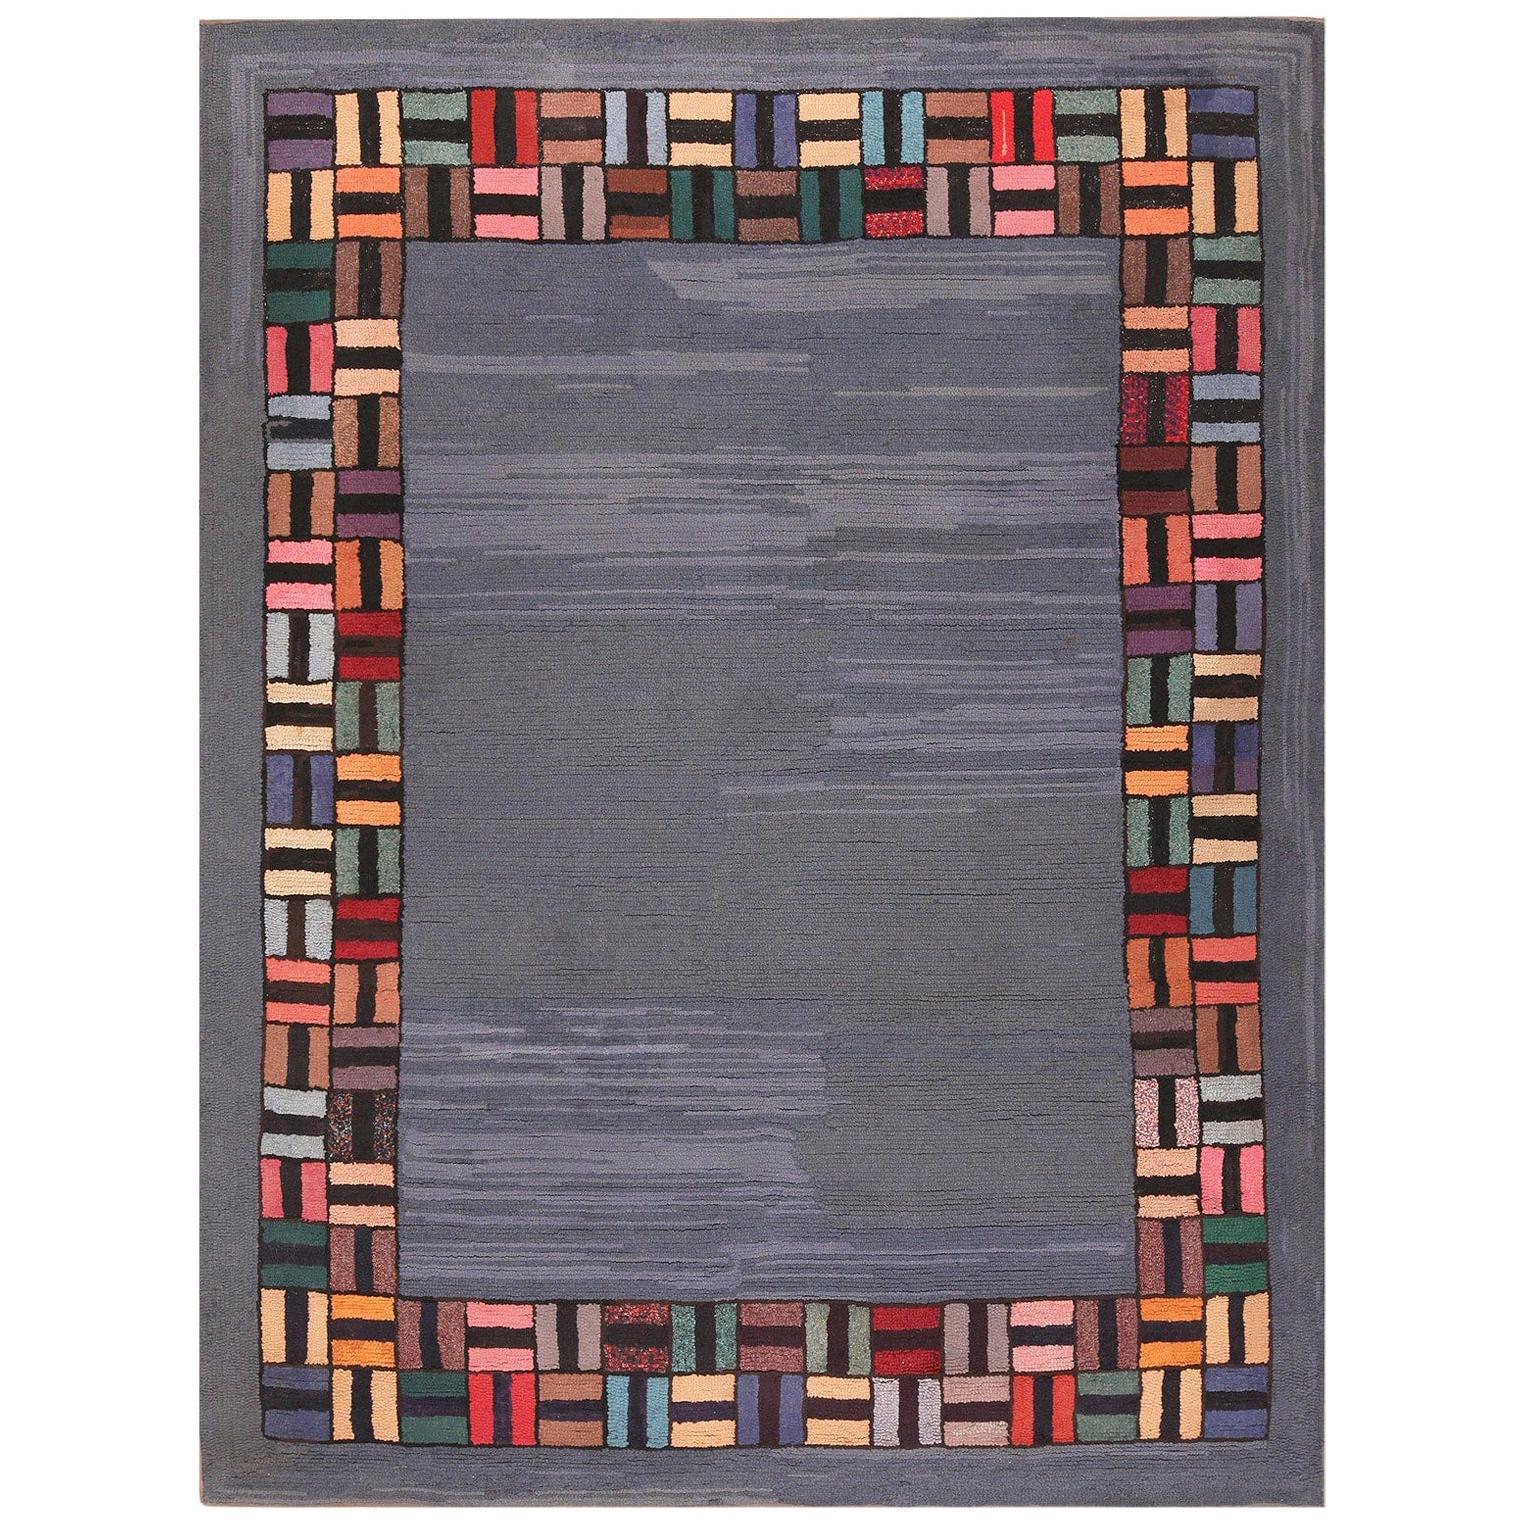 Antique American Hooked Rug. Light Blue. Size: 6 ft 8 in x 8 ft 8 in